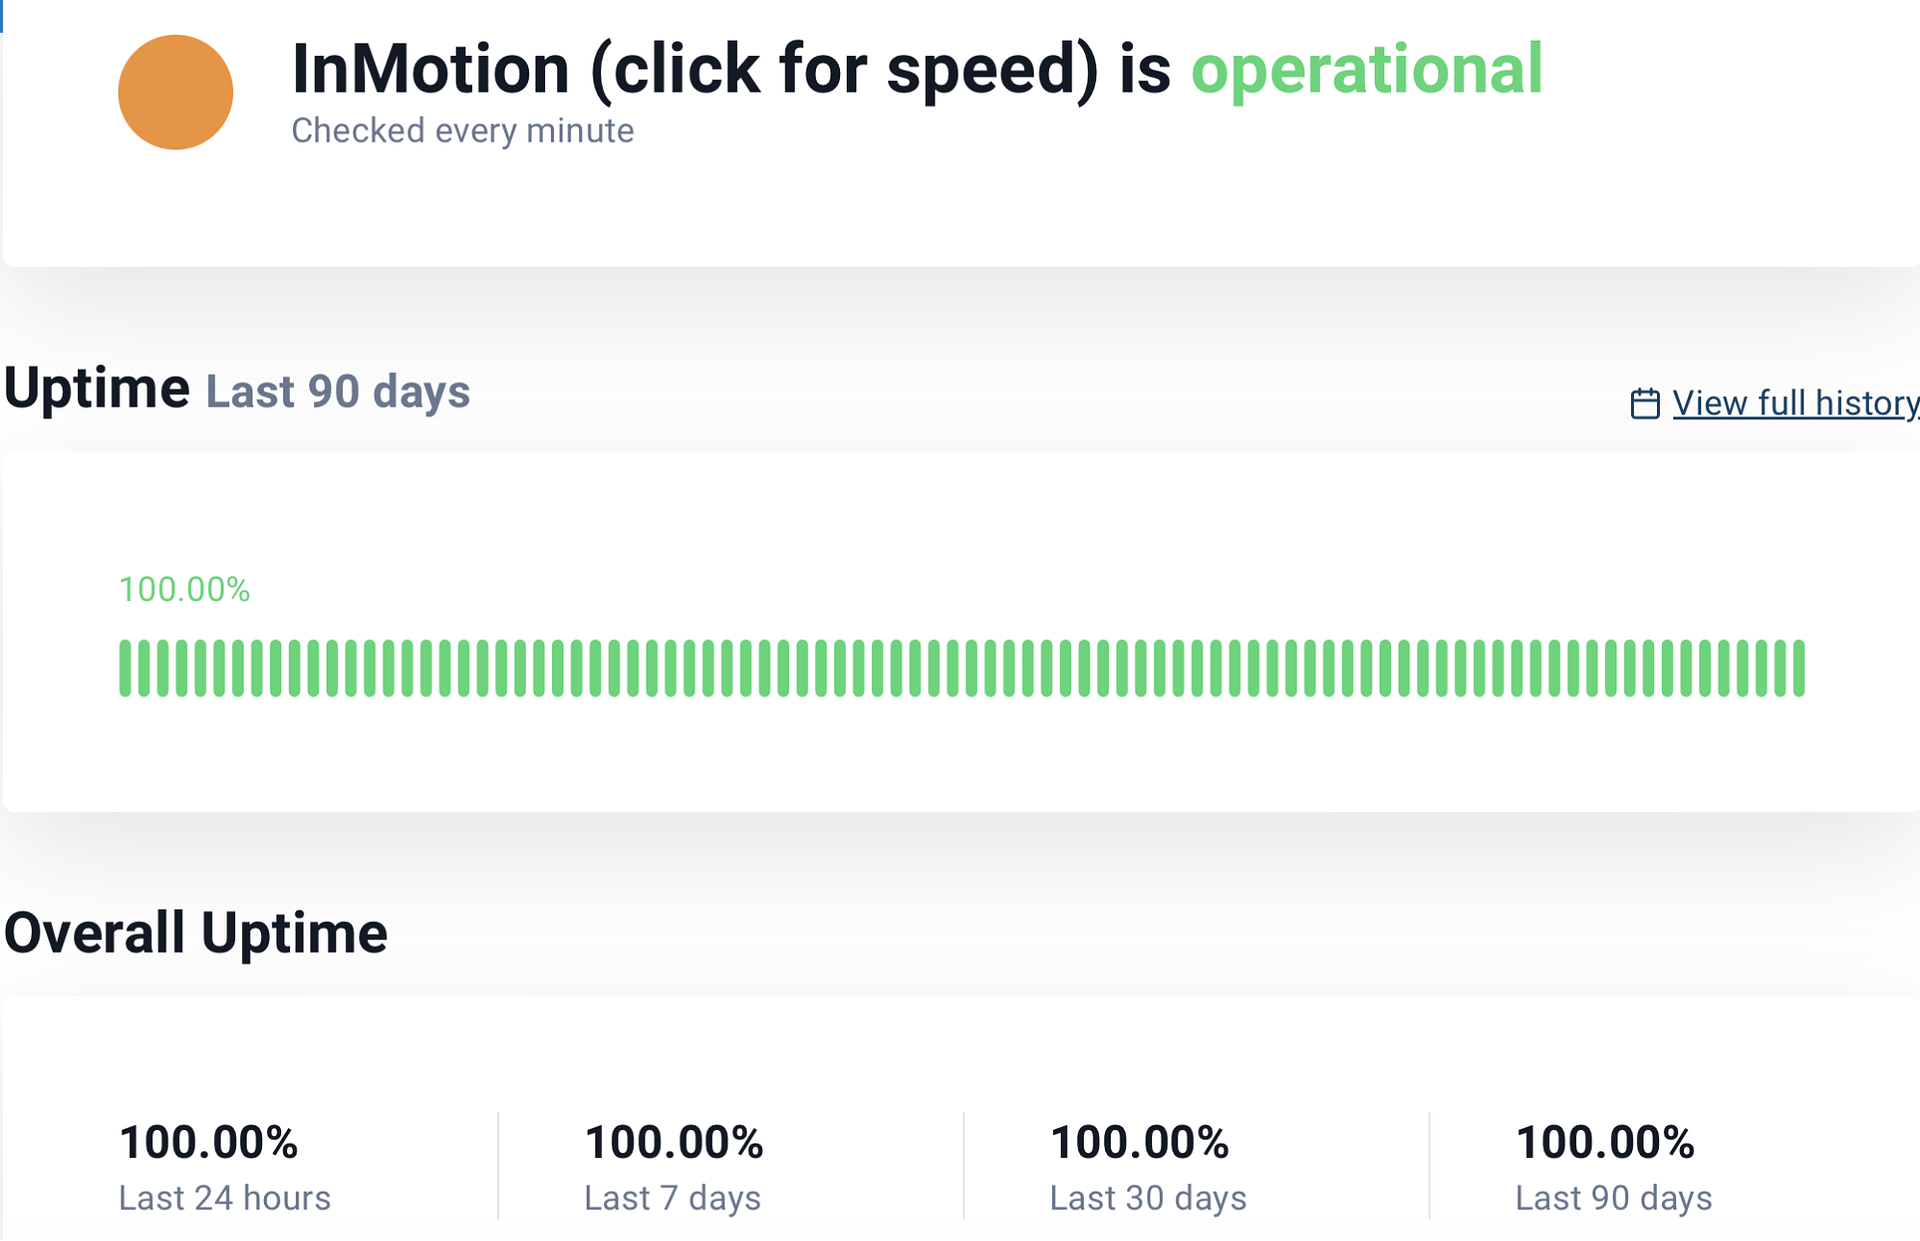 InMotion uptime over 90 days.